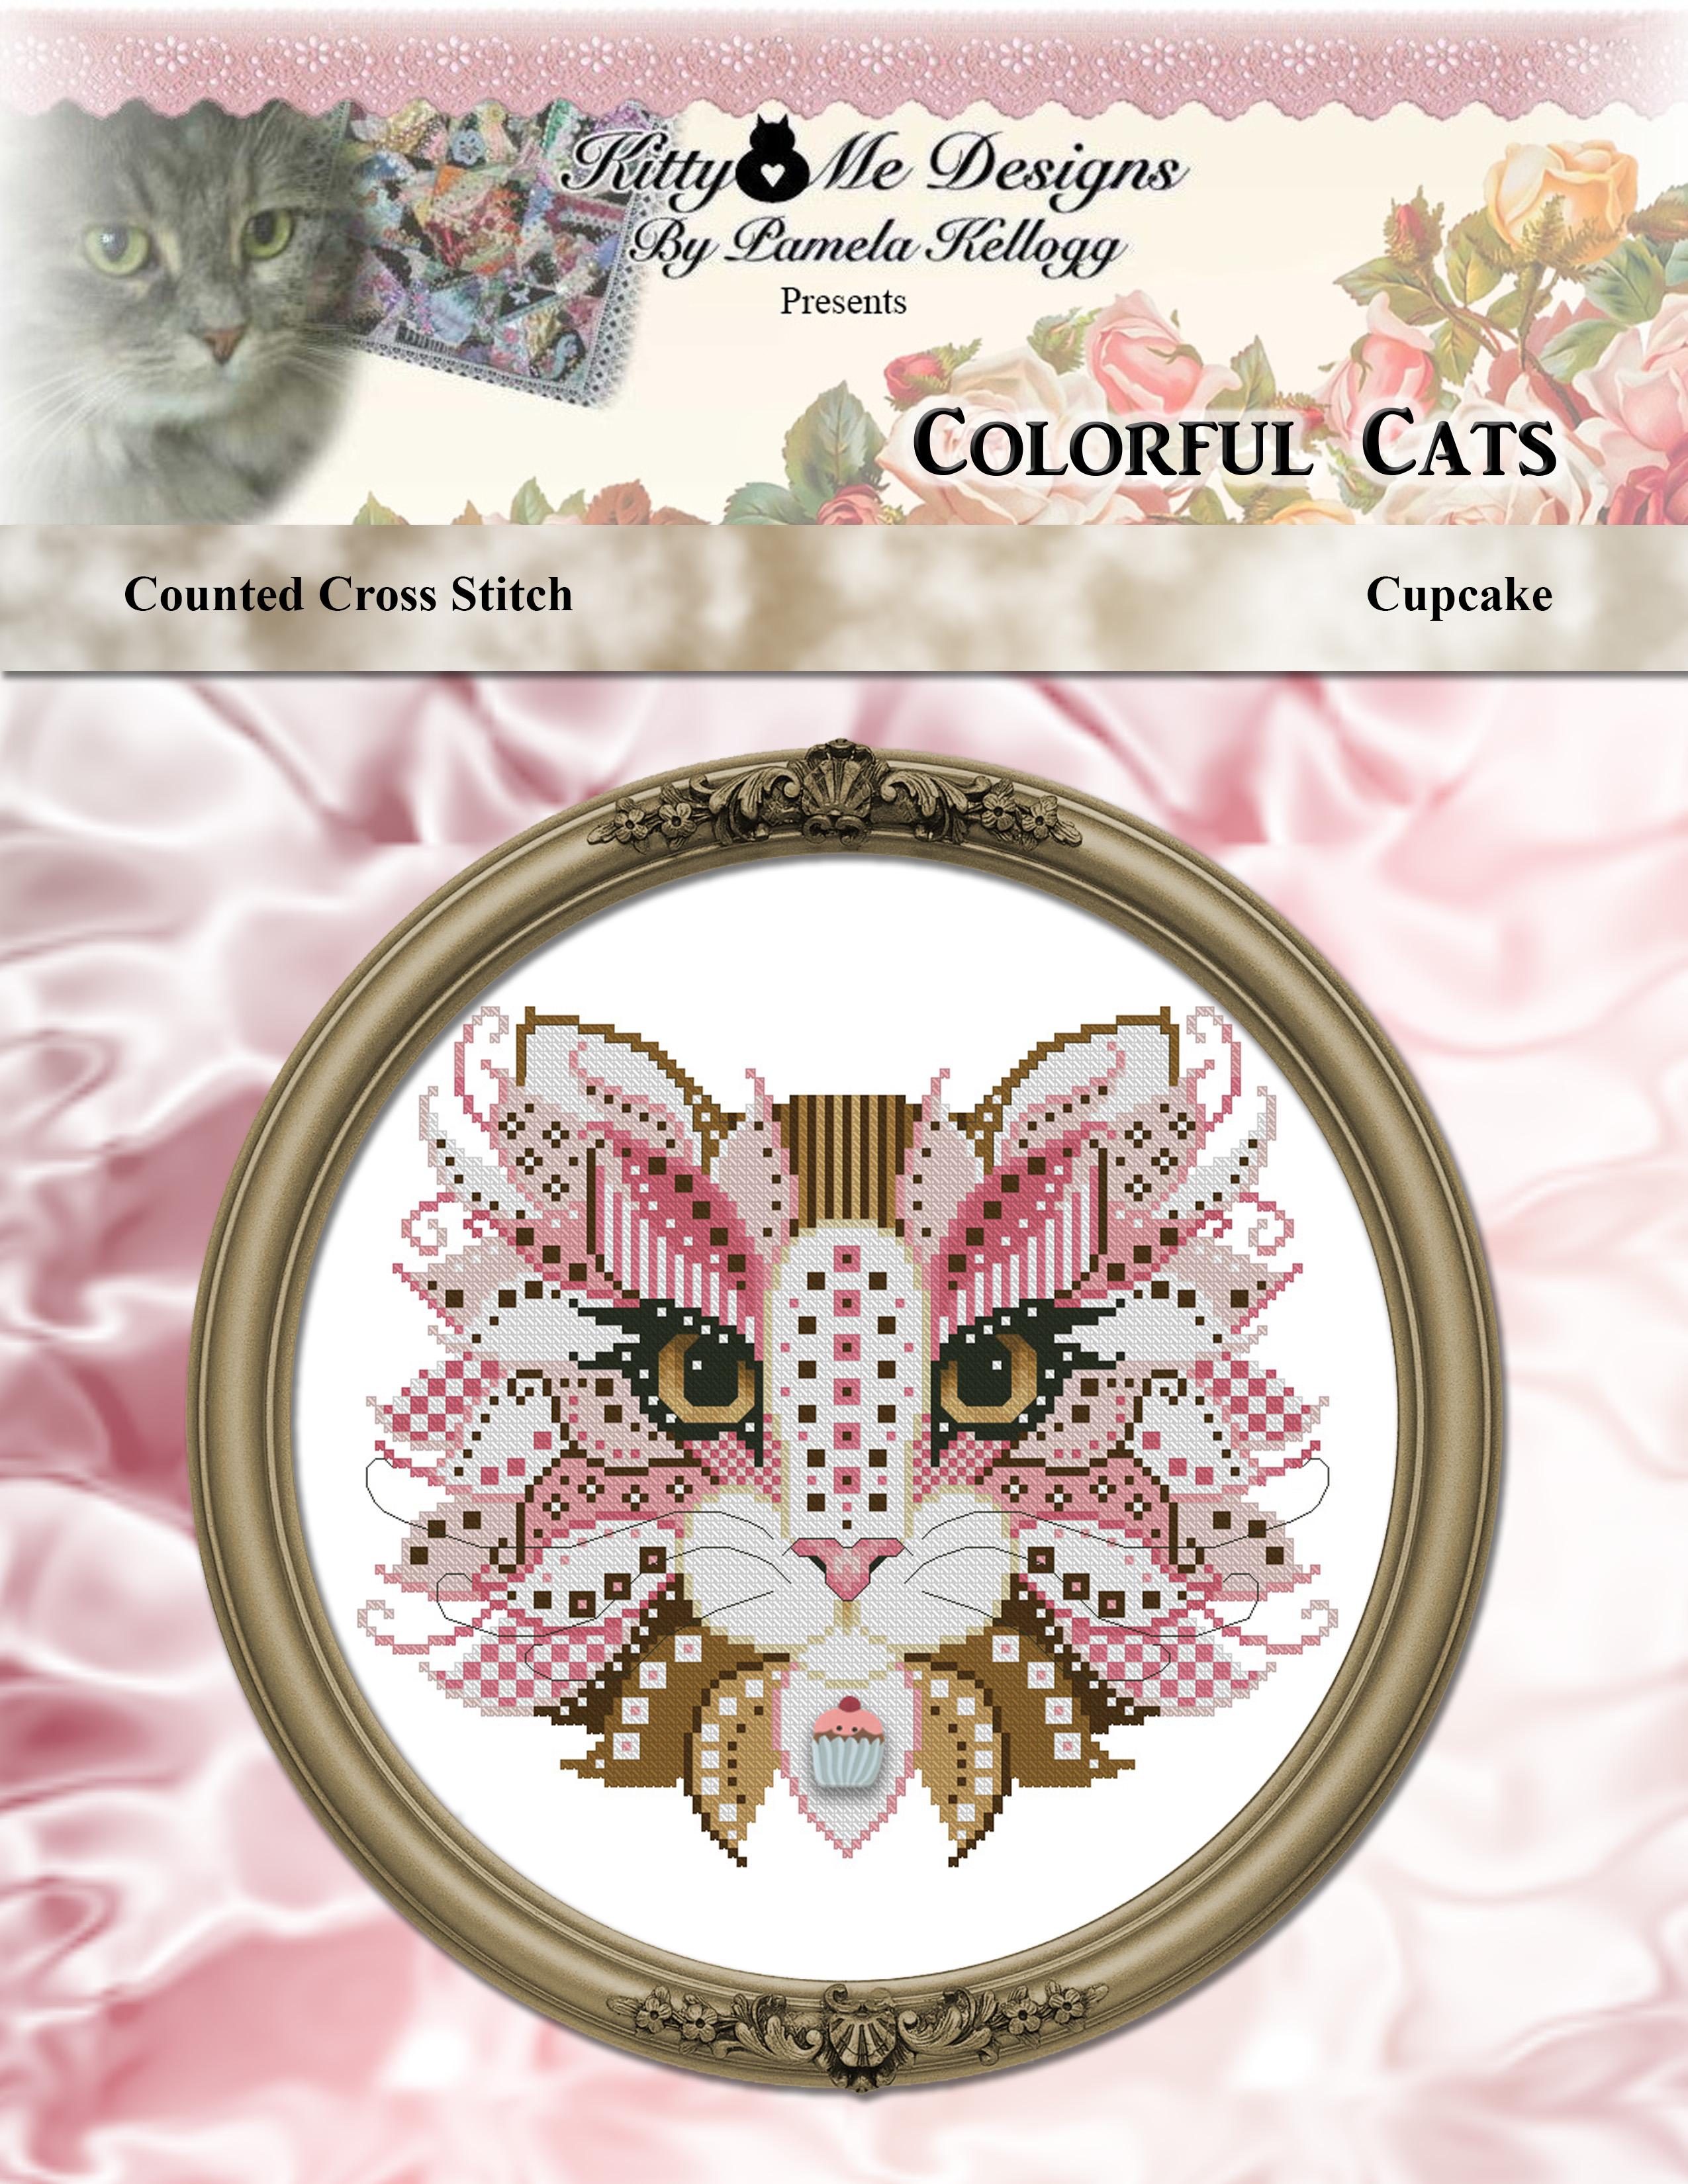 Colorful Cats: Cupcake by Kitty and Me Designs